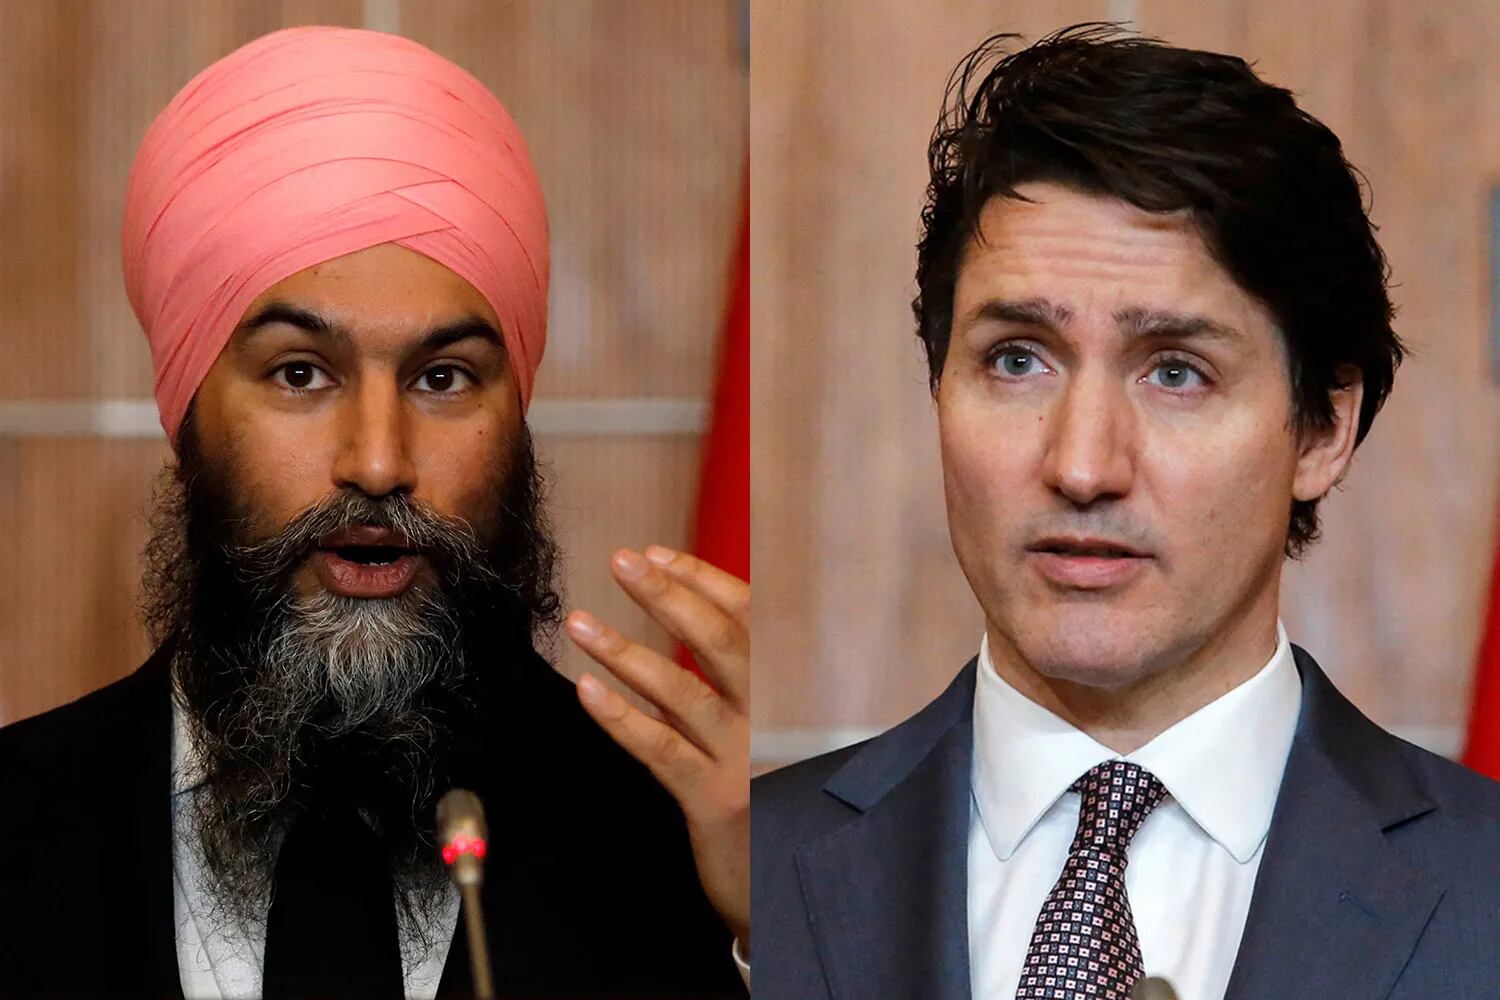 Under Liberal-NDP deal, Singh won't oppose higher defence spending in exchange for billions on social programs - The Globe and Mail